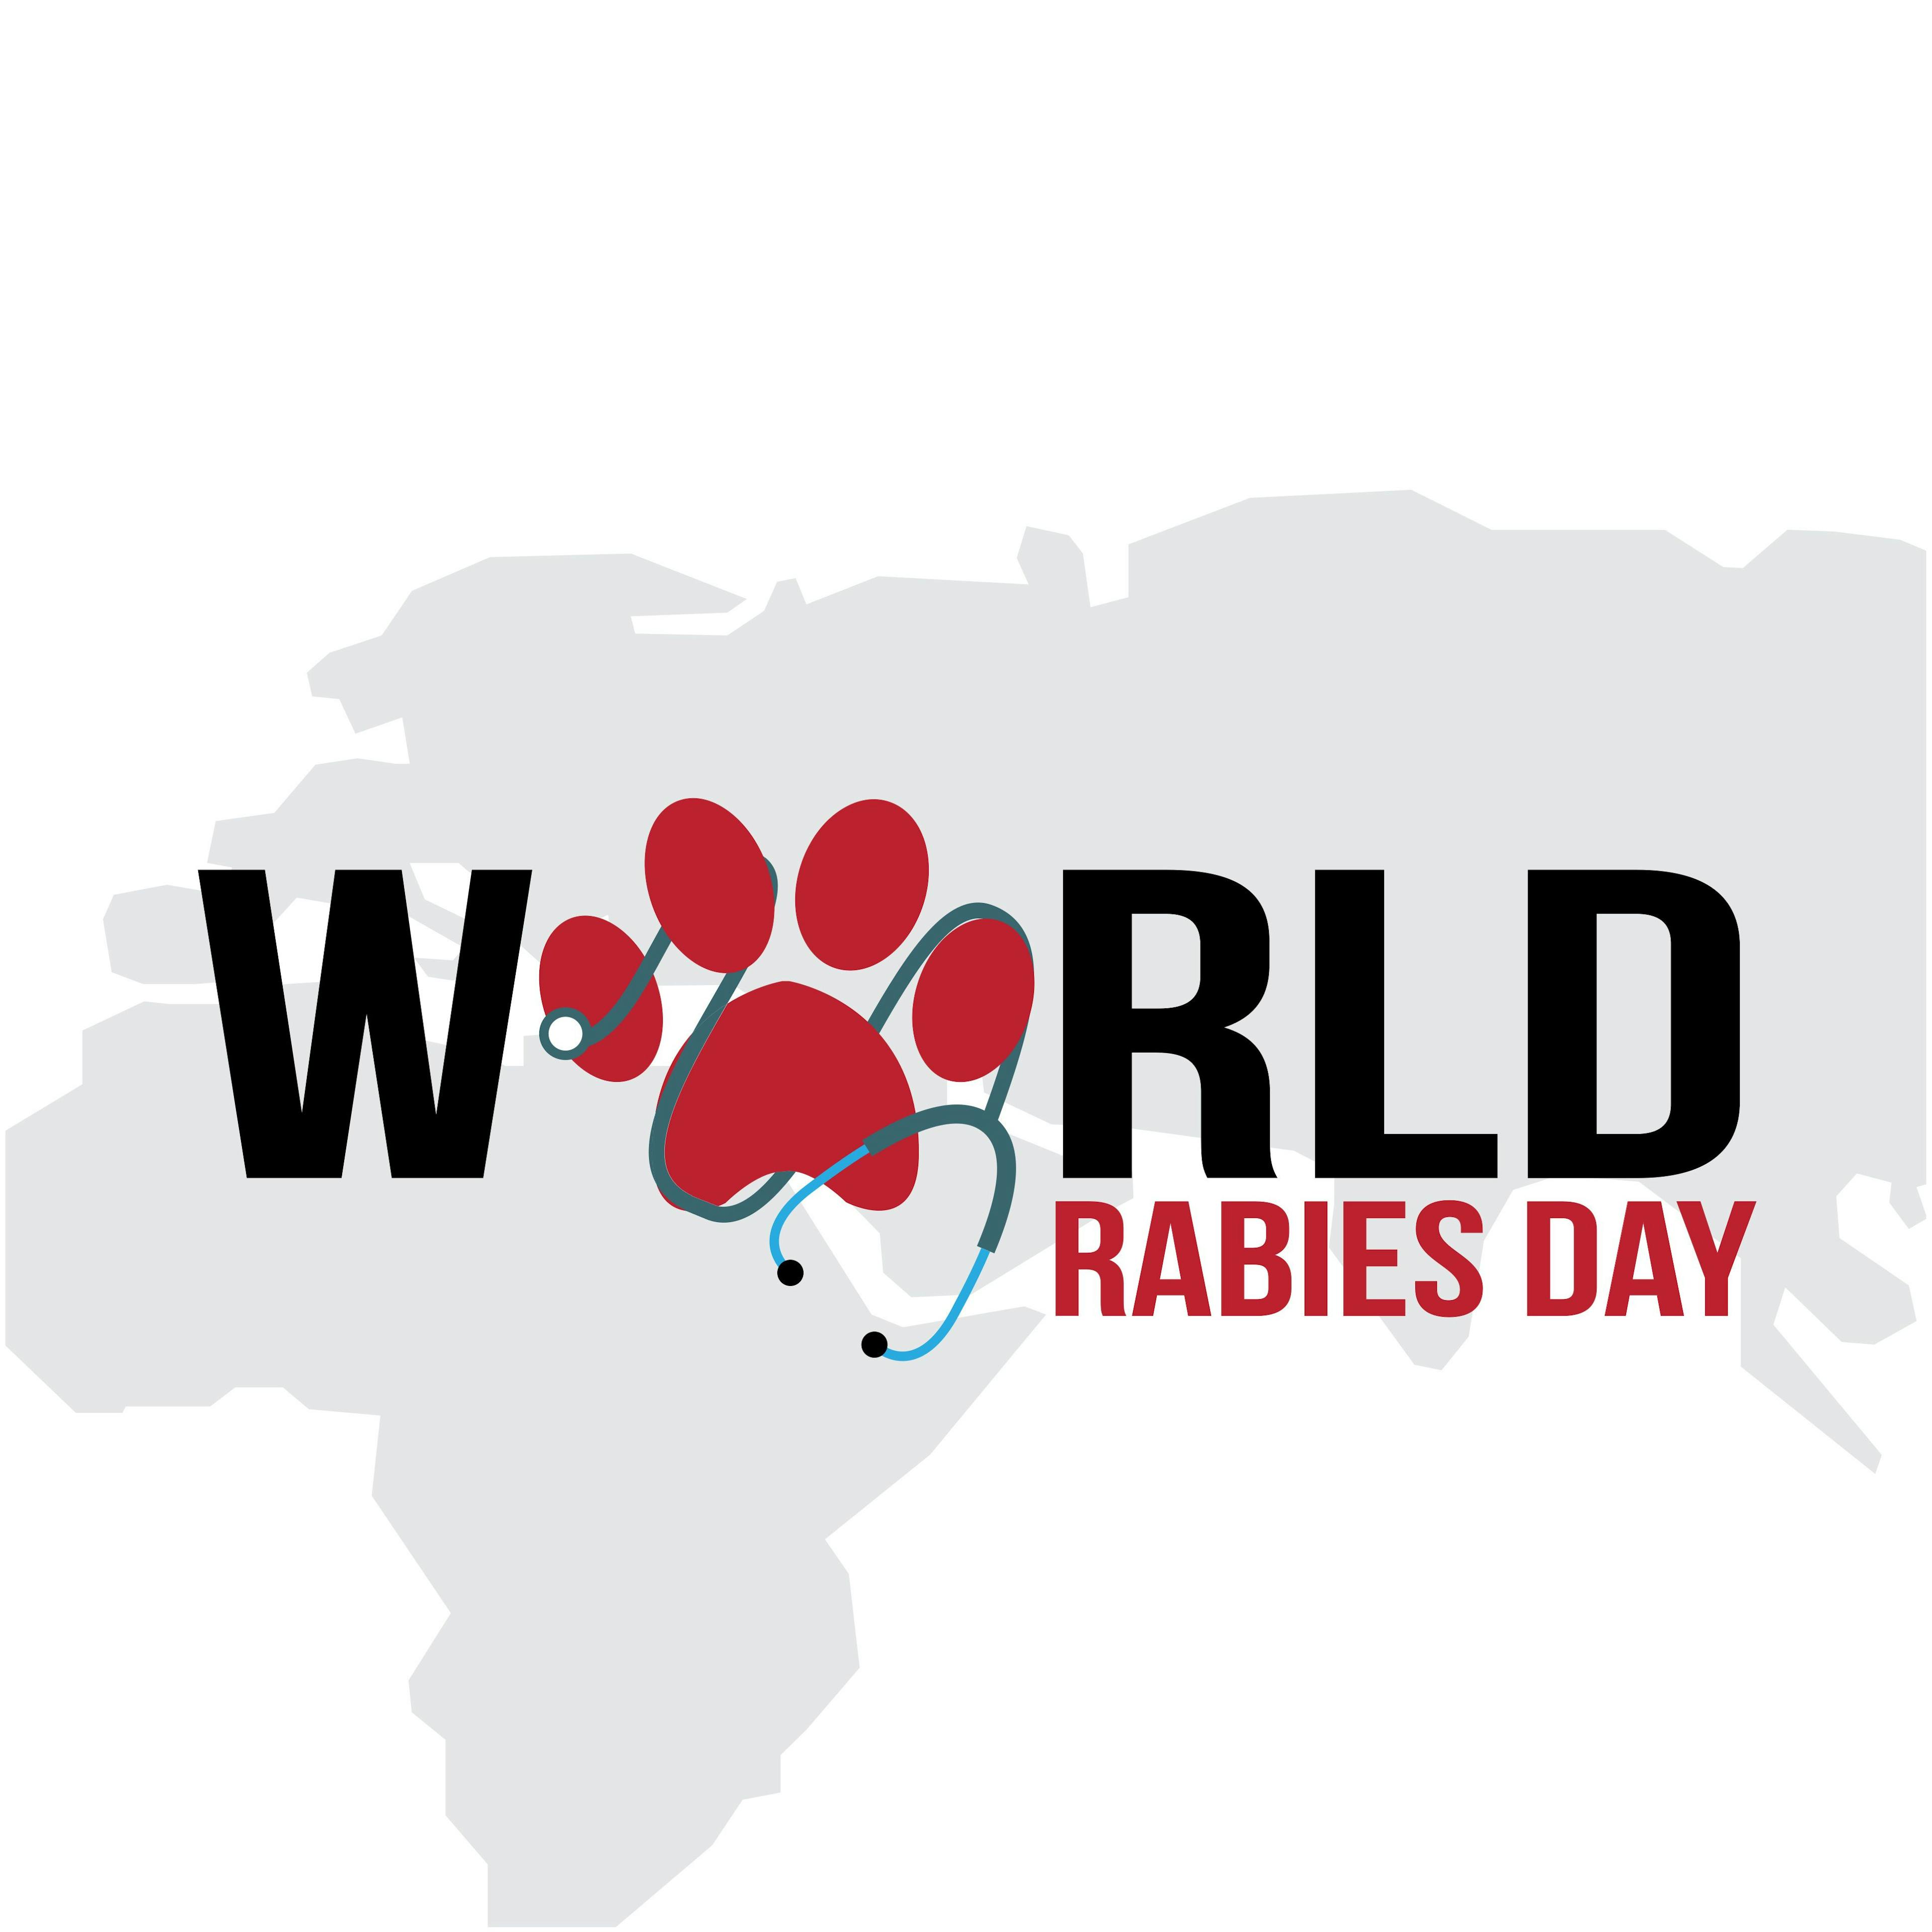 Celebrating World Rabies Day with 5 must-read rabies articles